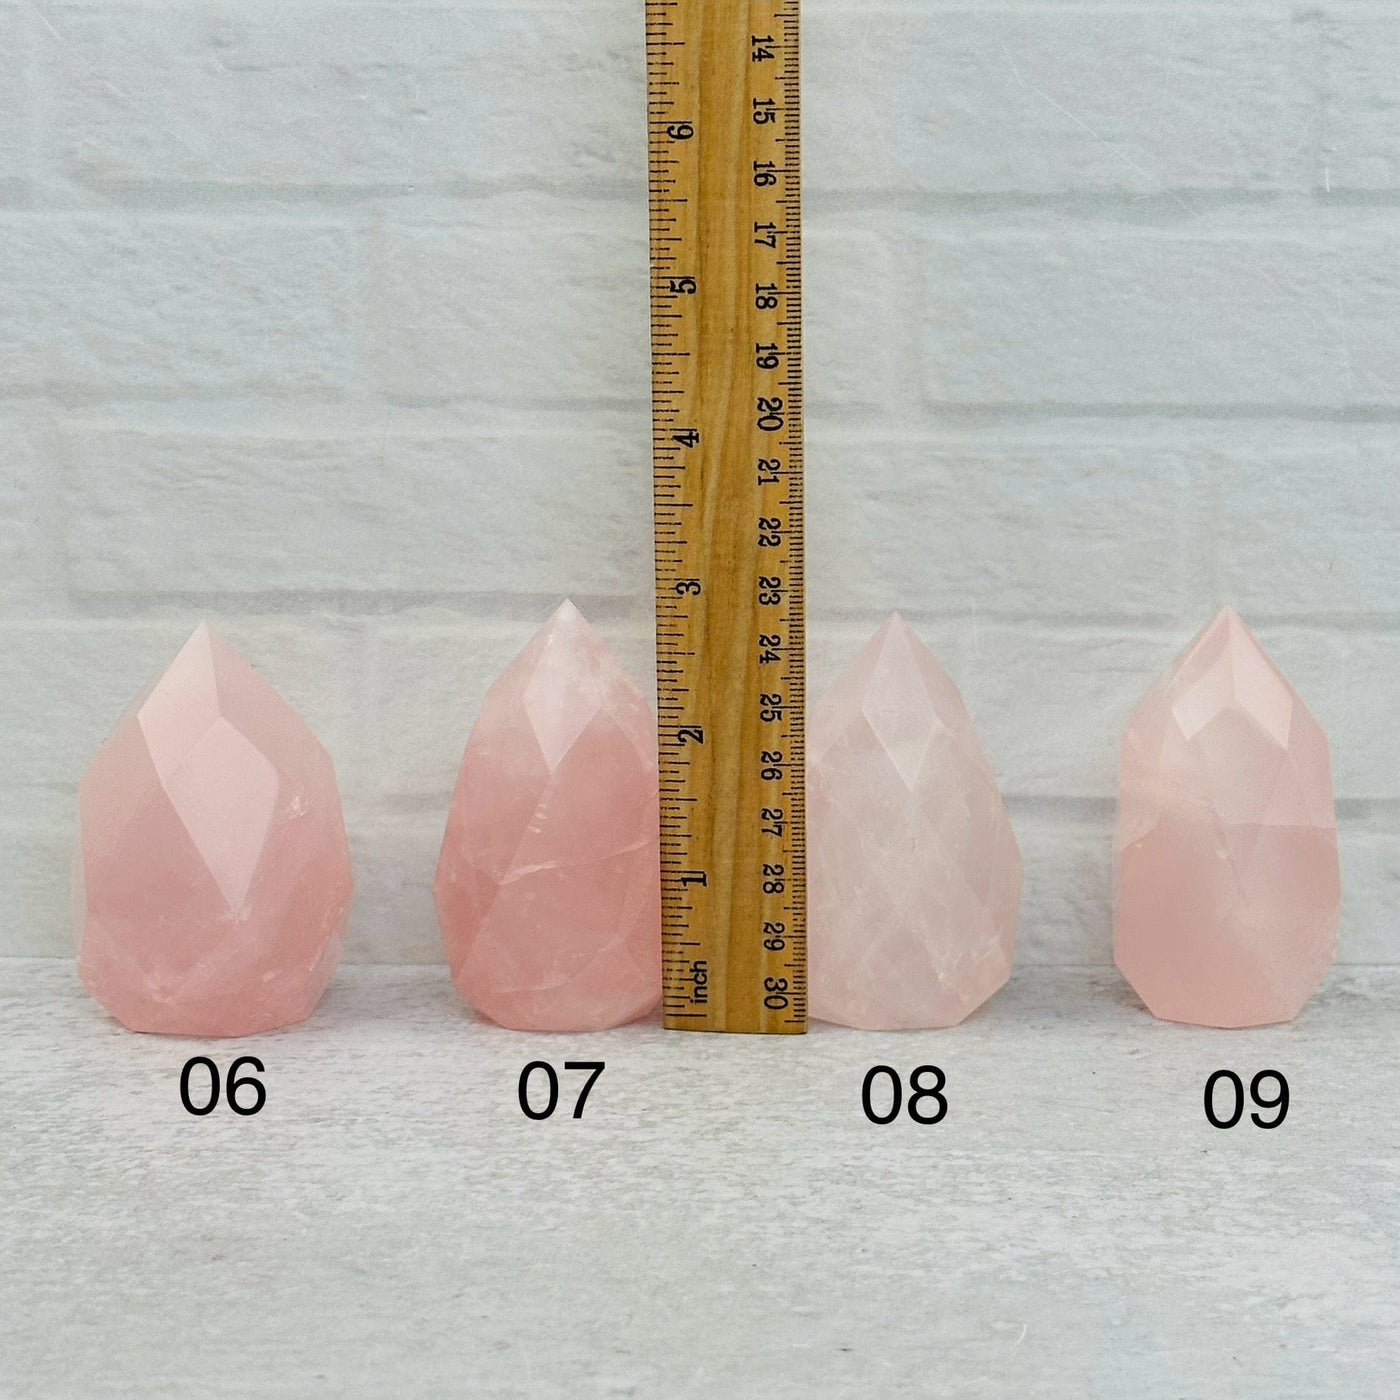 Faceted Rose Quartz Crystal Egg Point - You Choose - next to a ruler for size reference